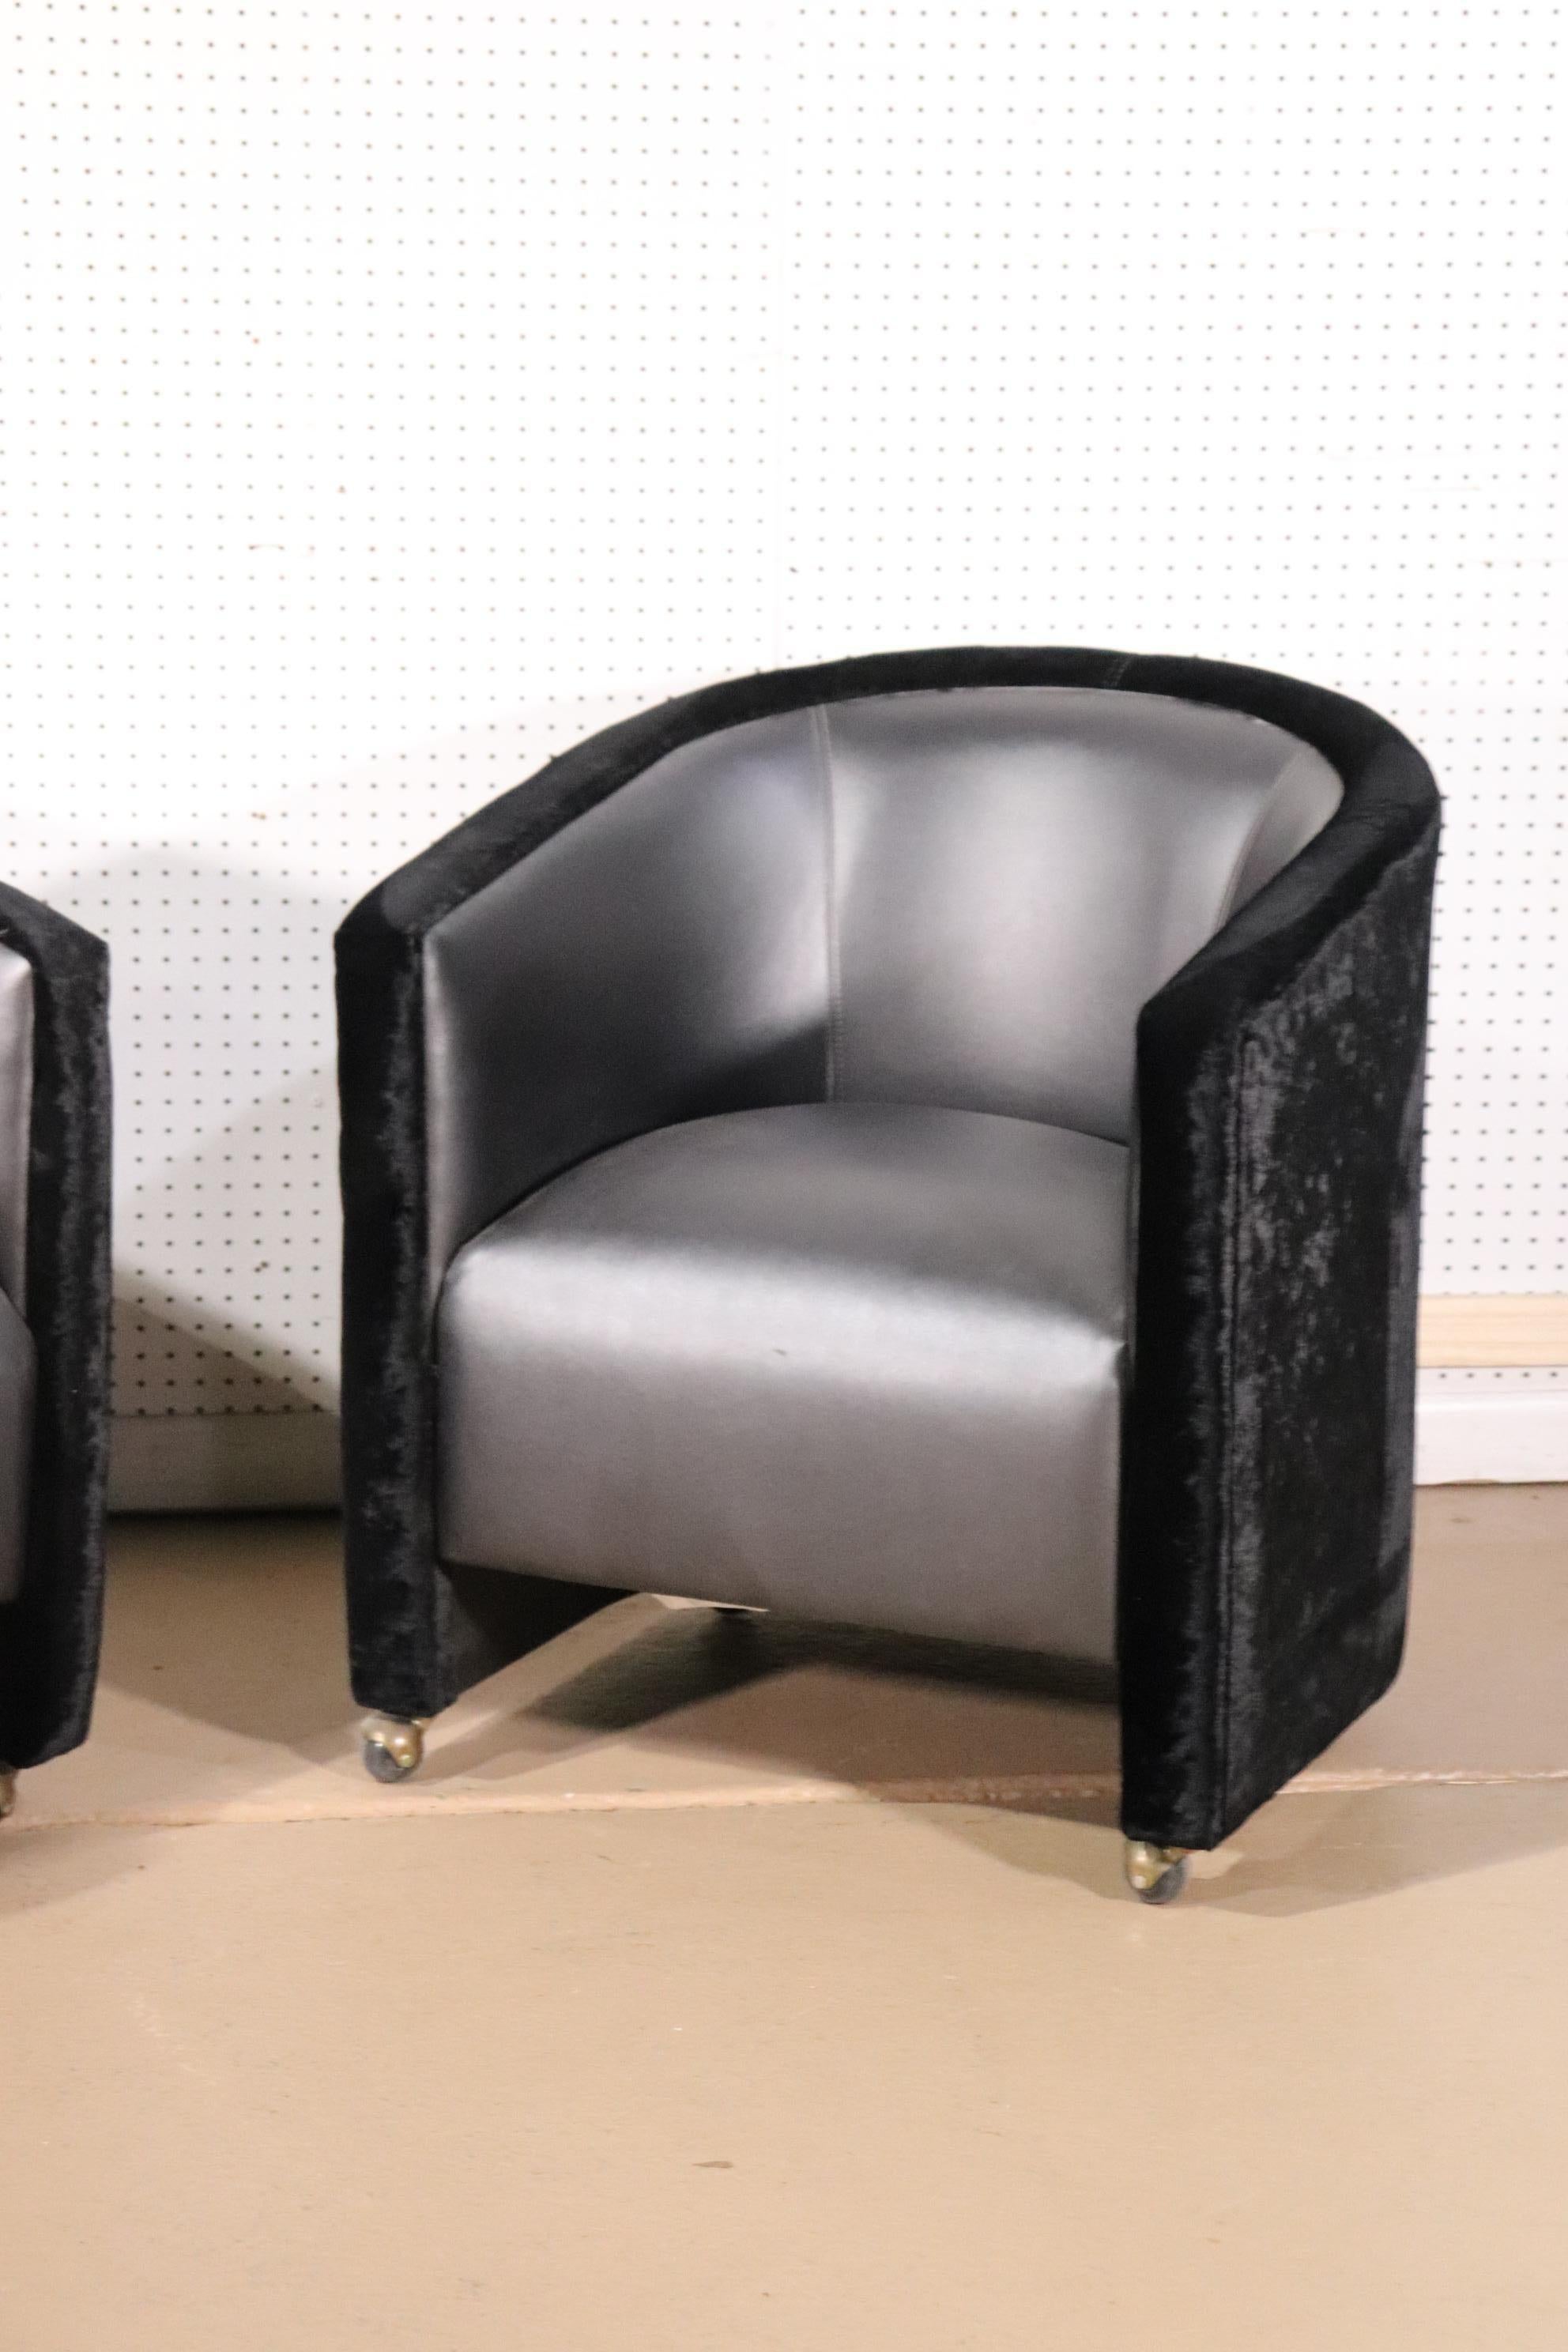 American Unique Pair Upholstered Art Deco Style Modern Club Chairs